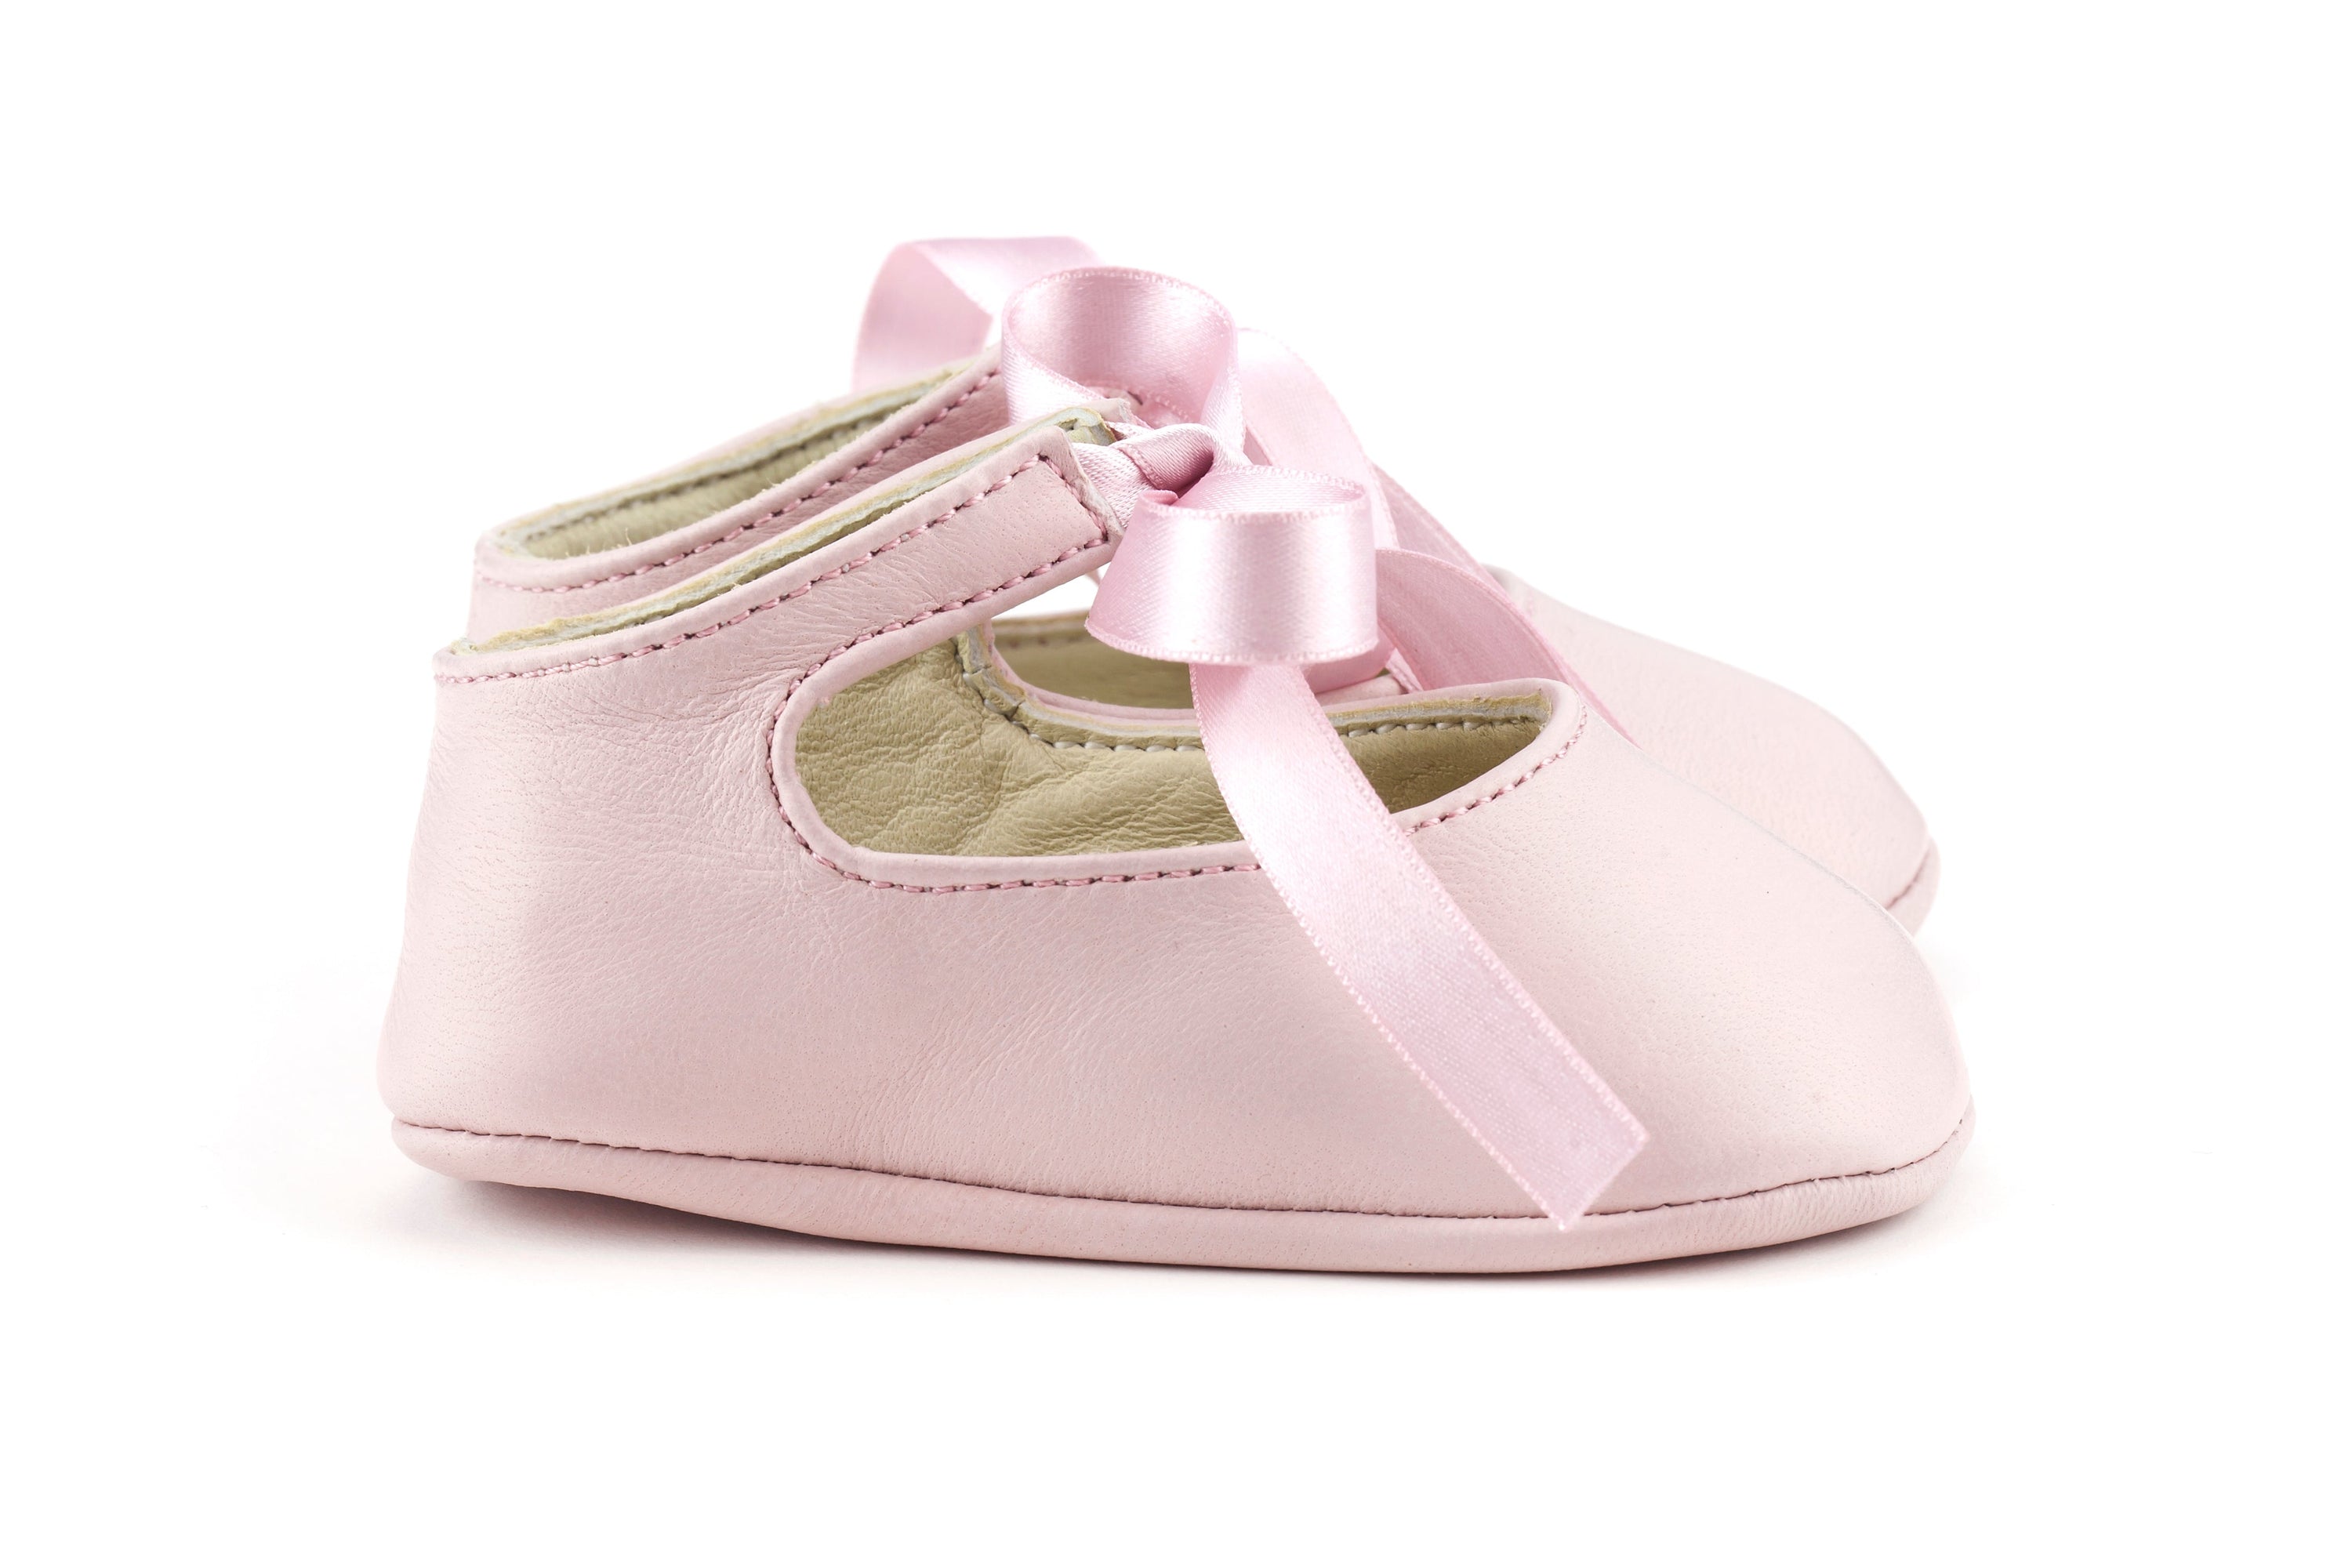 Little Royals Leather Booties Josephine - Pink